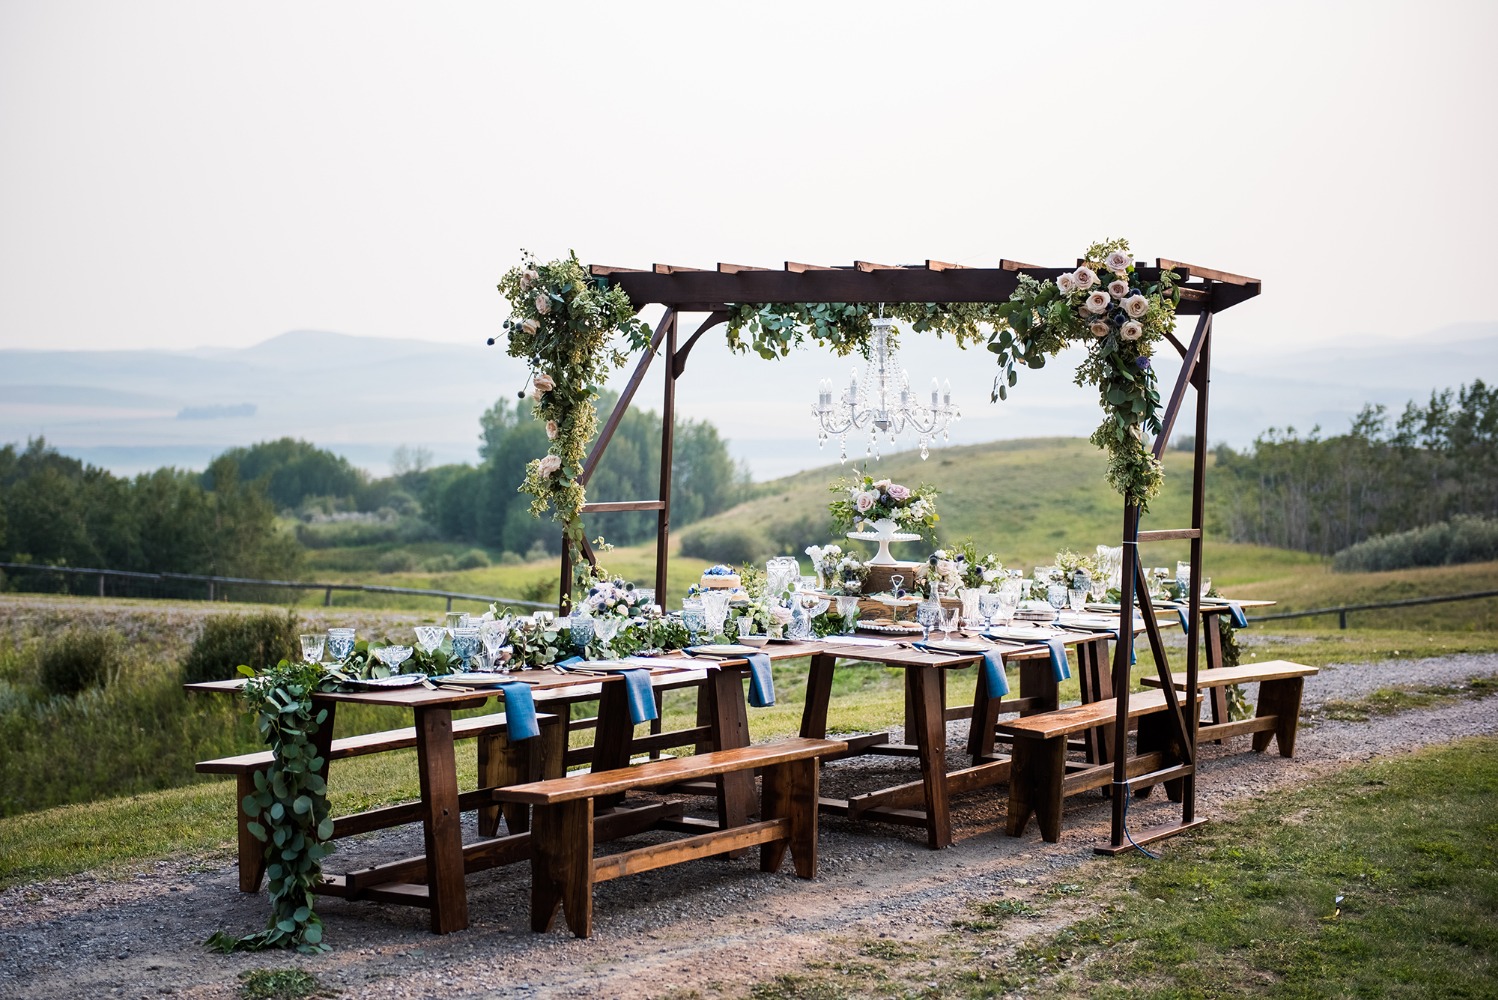 Rustic vintage table for a wedding